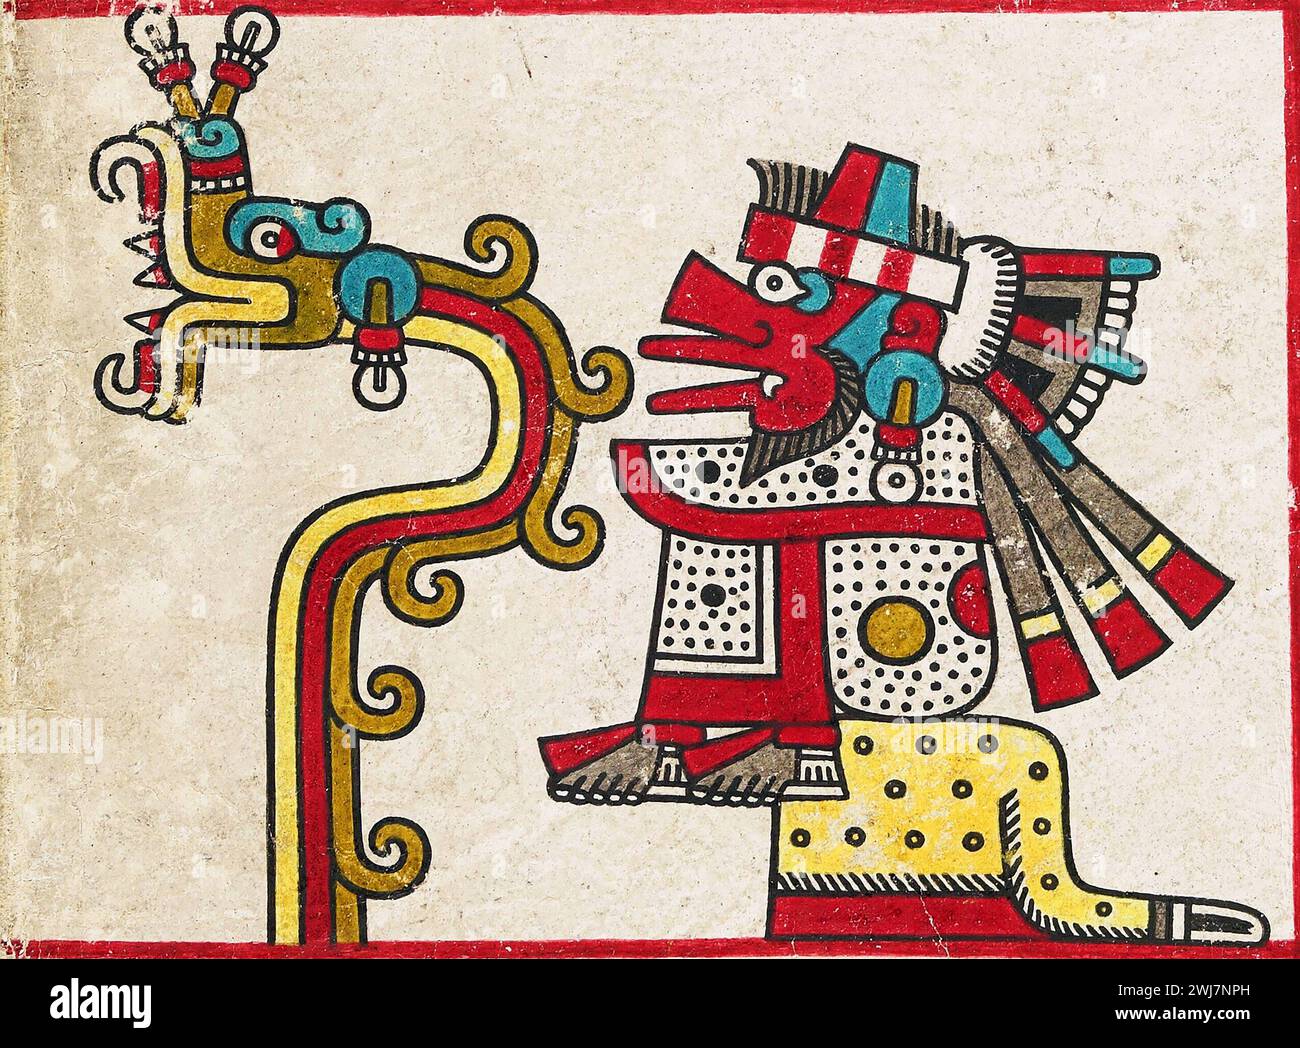 Quetzalcoatl, a deity in Aztec culture and literature. Depiction of the two forms of the god Quetzalcoatl from the Codex Laud, a pre-Hispanic Mexican manuscript possibly made in the 15th century. His form as the feathered serpent, celestial deity, is depicted at the left, and his form as the god of the wind Ehecatl is seen at the right, Stock Photo